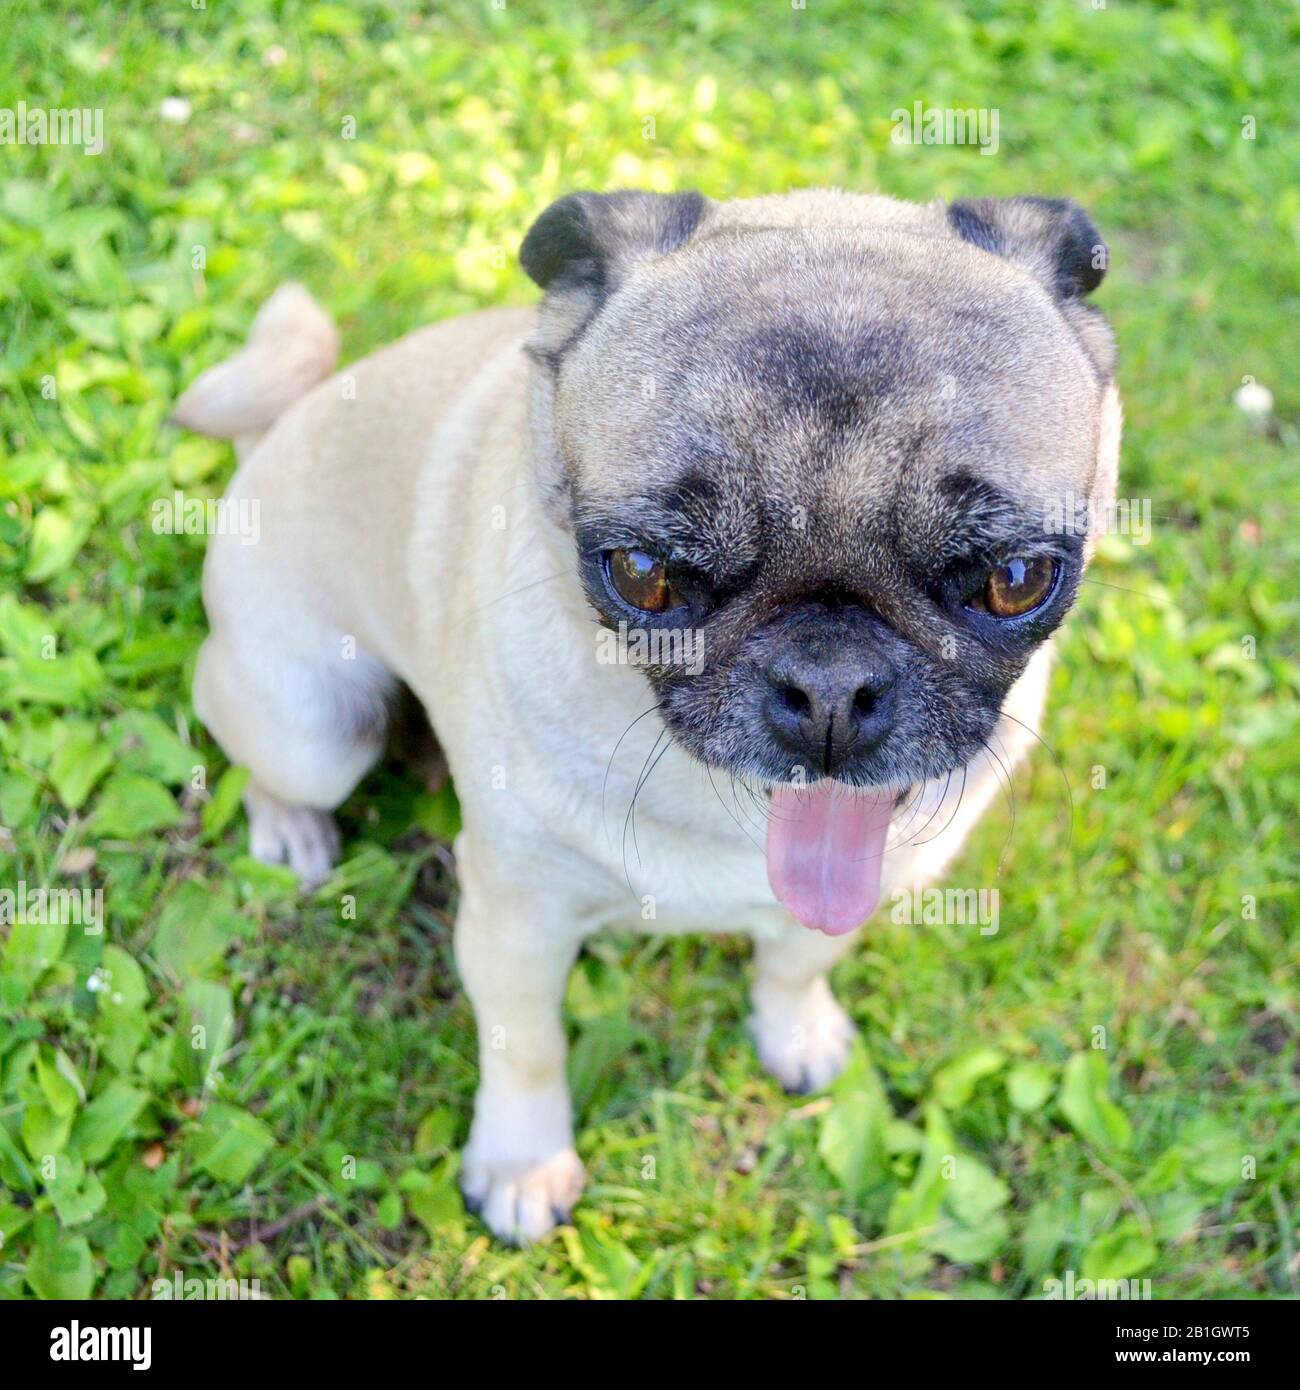 On a hot summer day, a pug dog is panting with its little tongue sticking out. Stock Photo